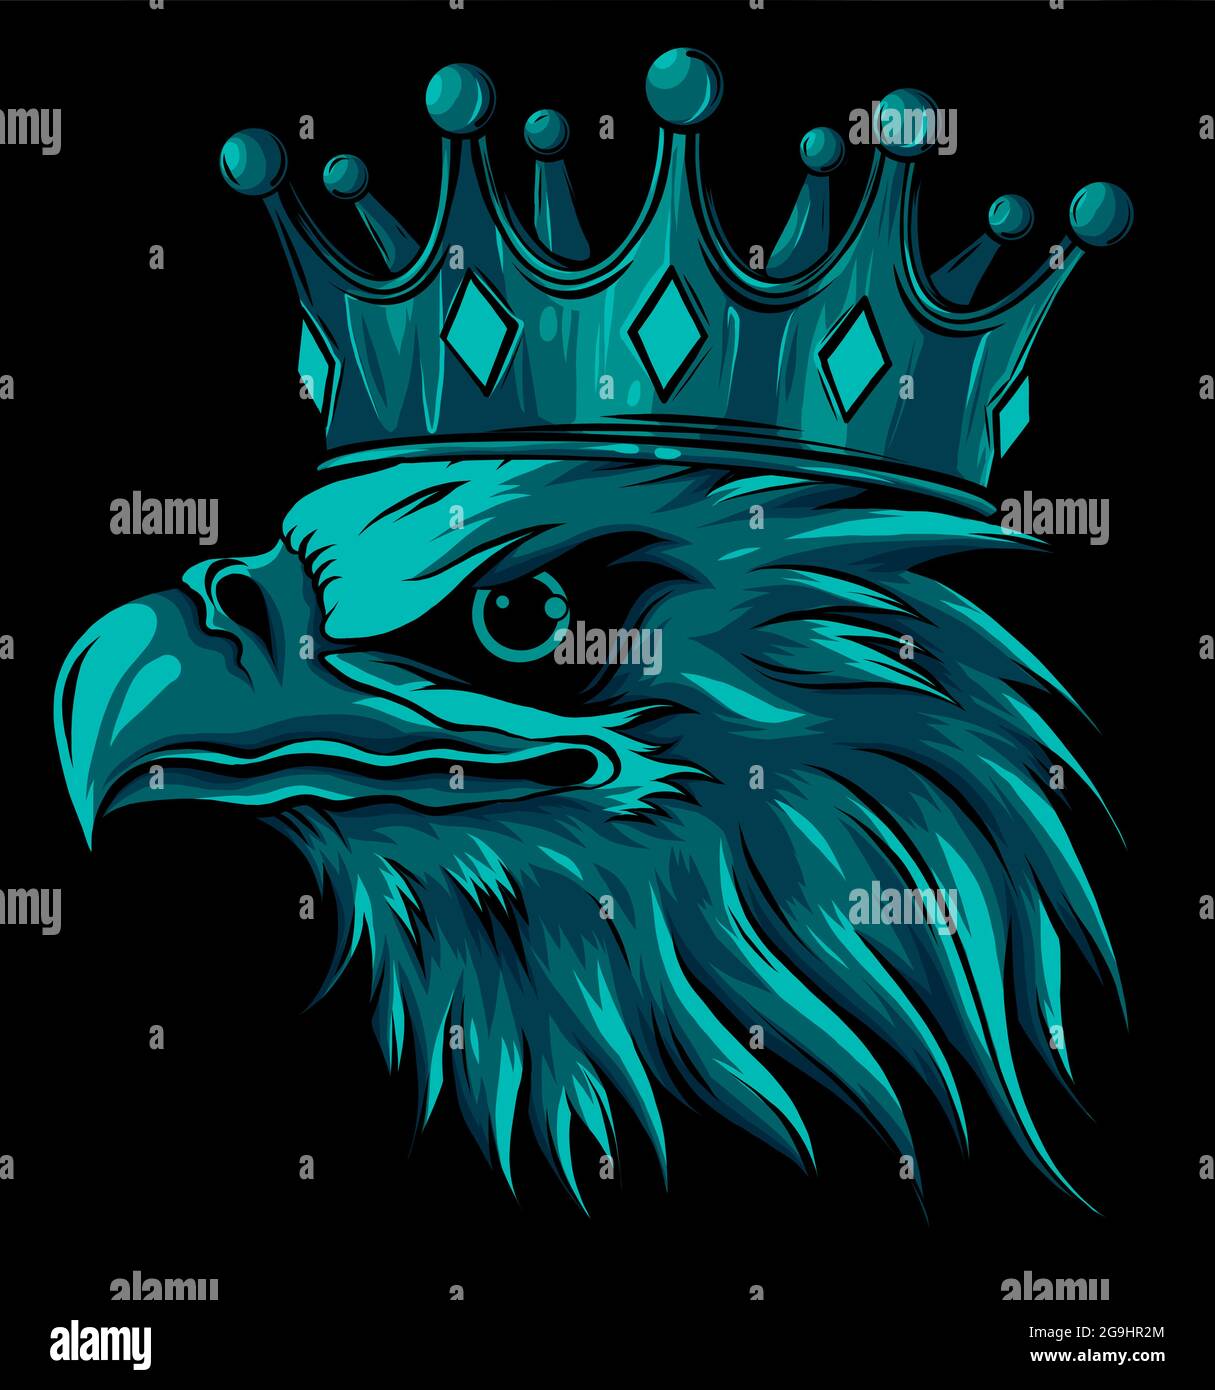 Eagle with a crown logo Template | PosterMyWall